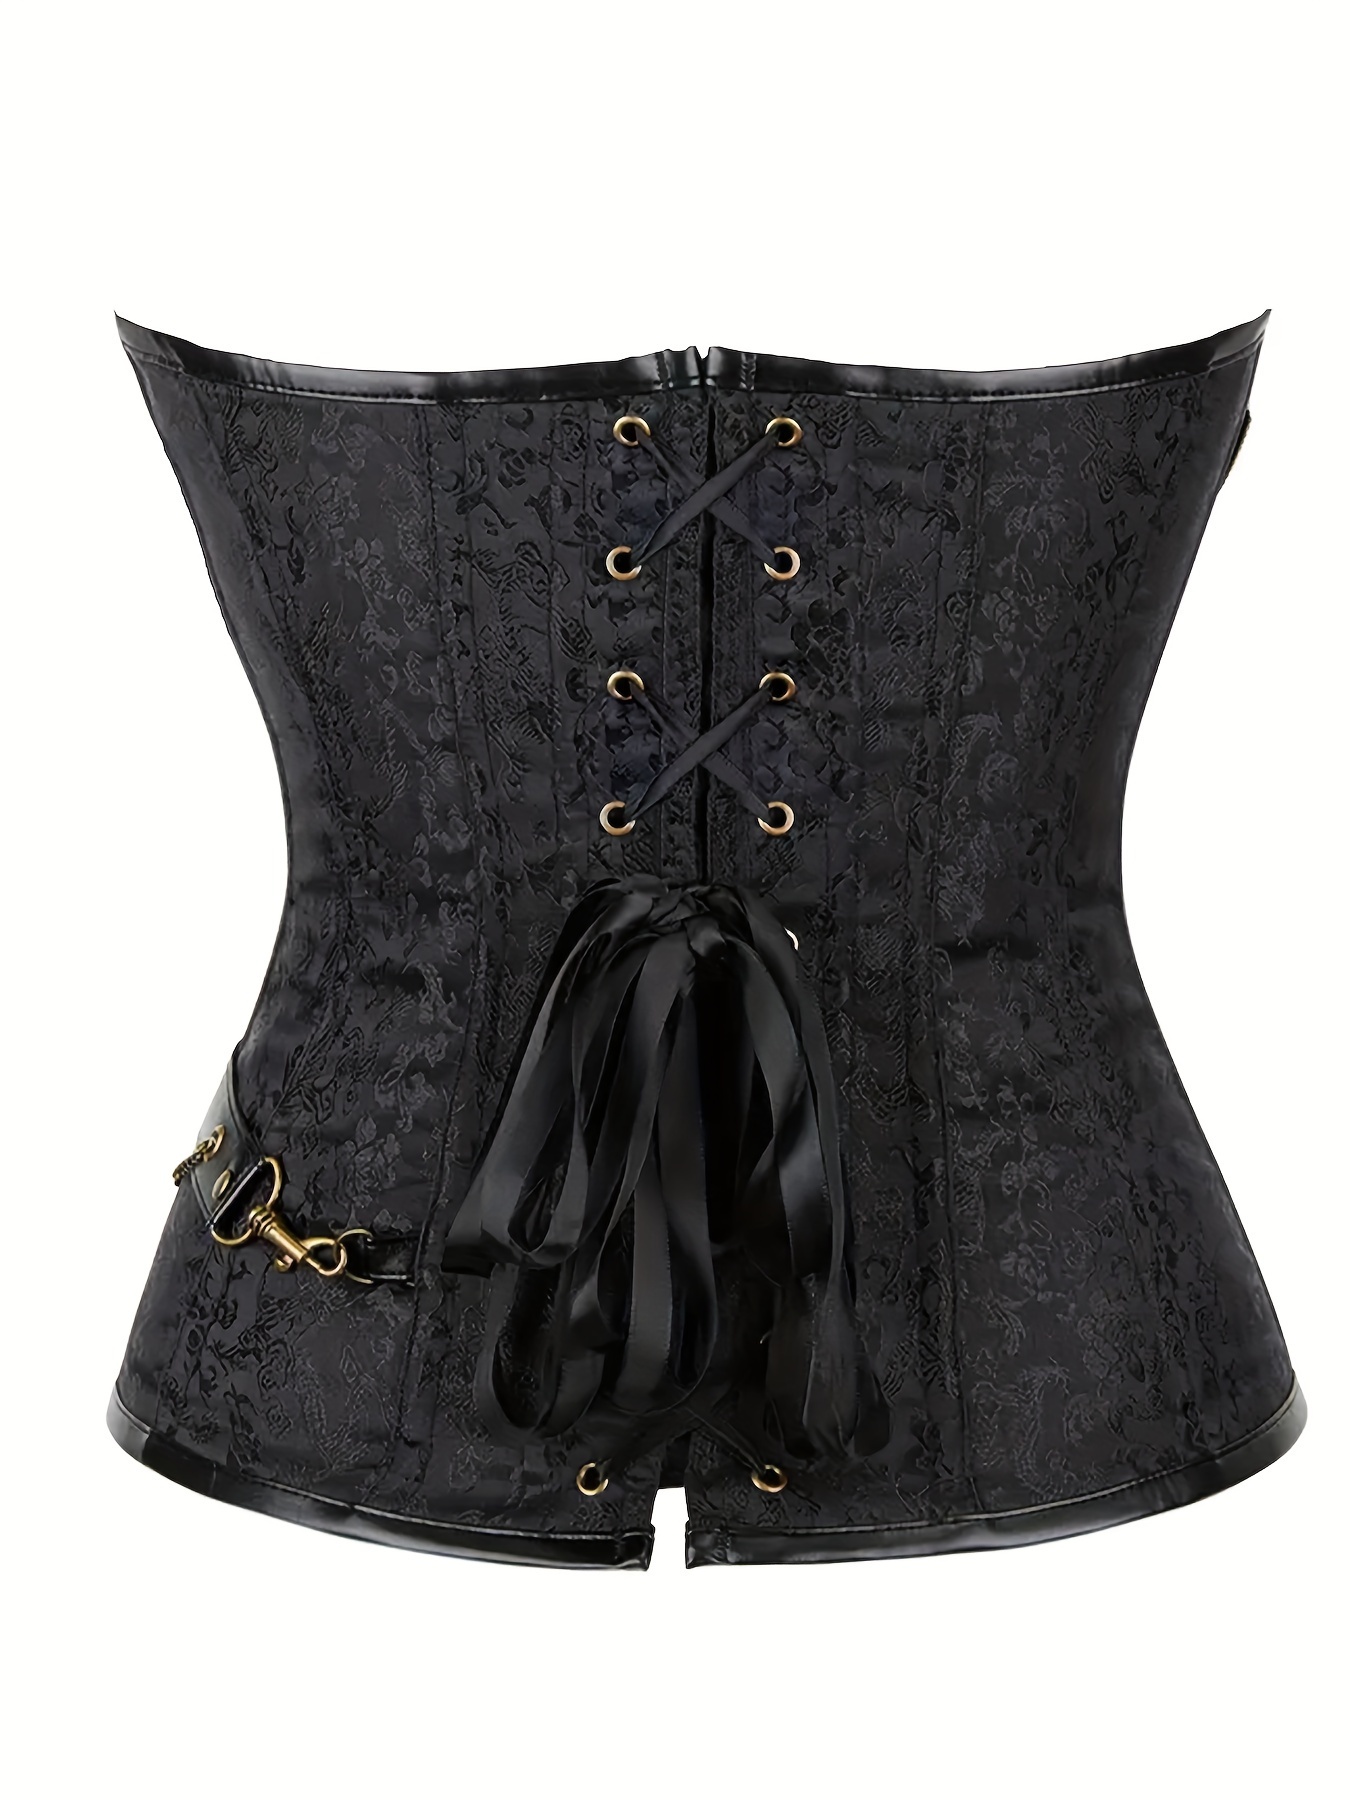 Women Abdomen Tight Corset Vintage Lace Up Bustiers Slimm Waist Girdle  Shaping Tops With Side Zipper Bodices Outwear For Dress